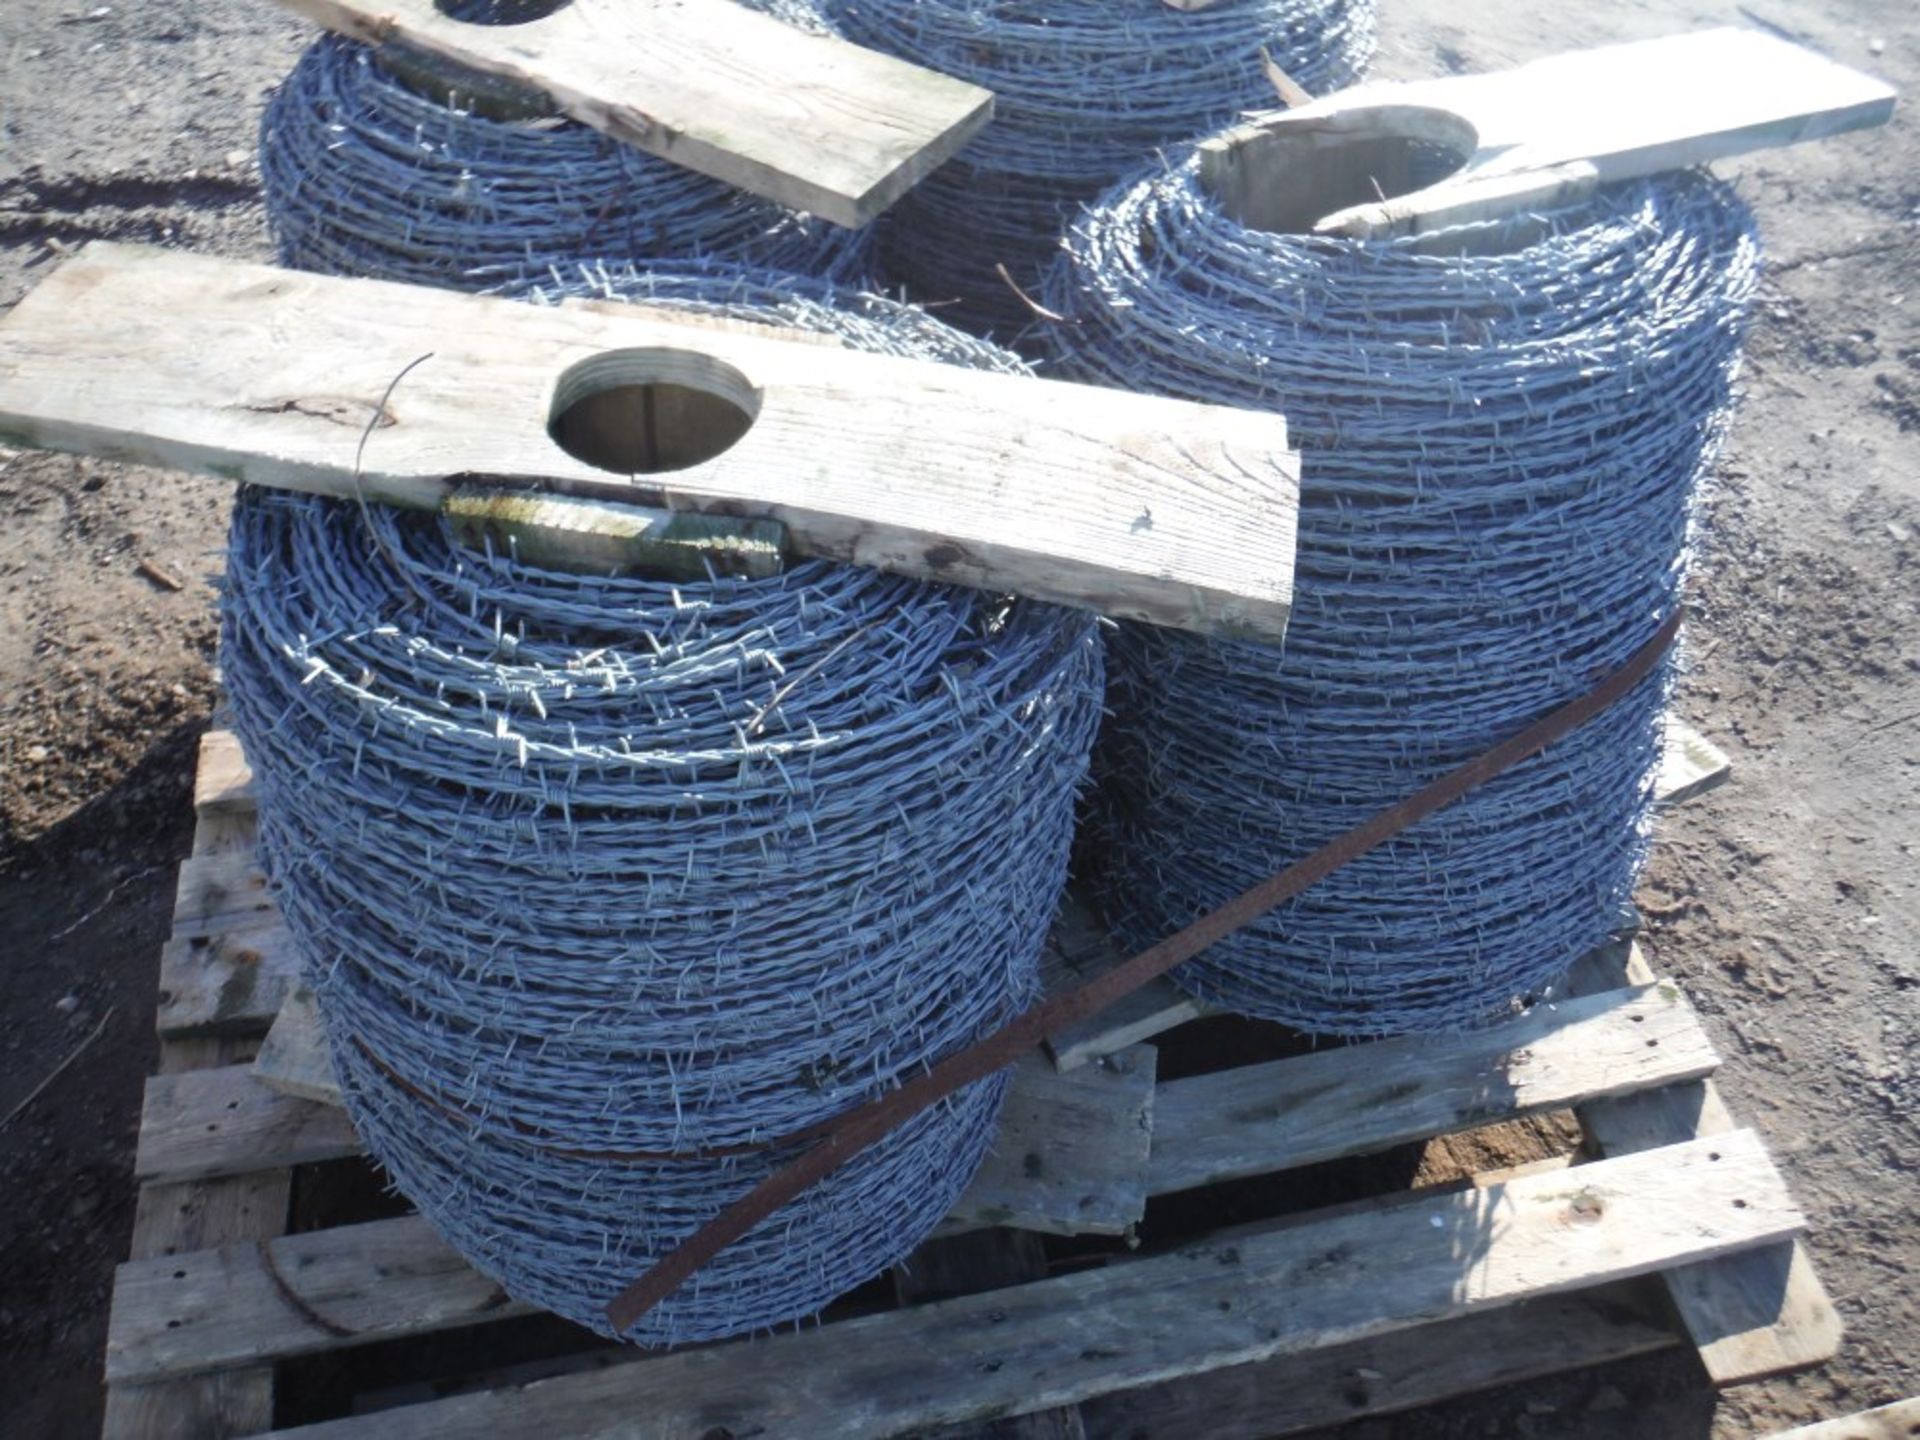 2 ROLLS OF BARBED WIRE 2FT HIGH X 18" WIDE [NO VAT]